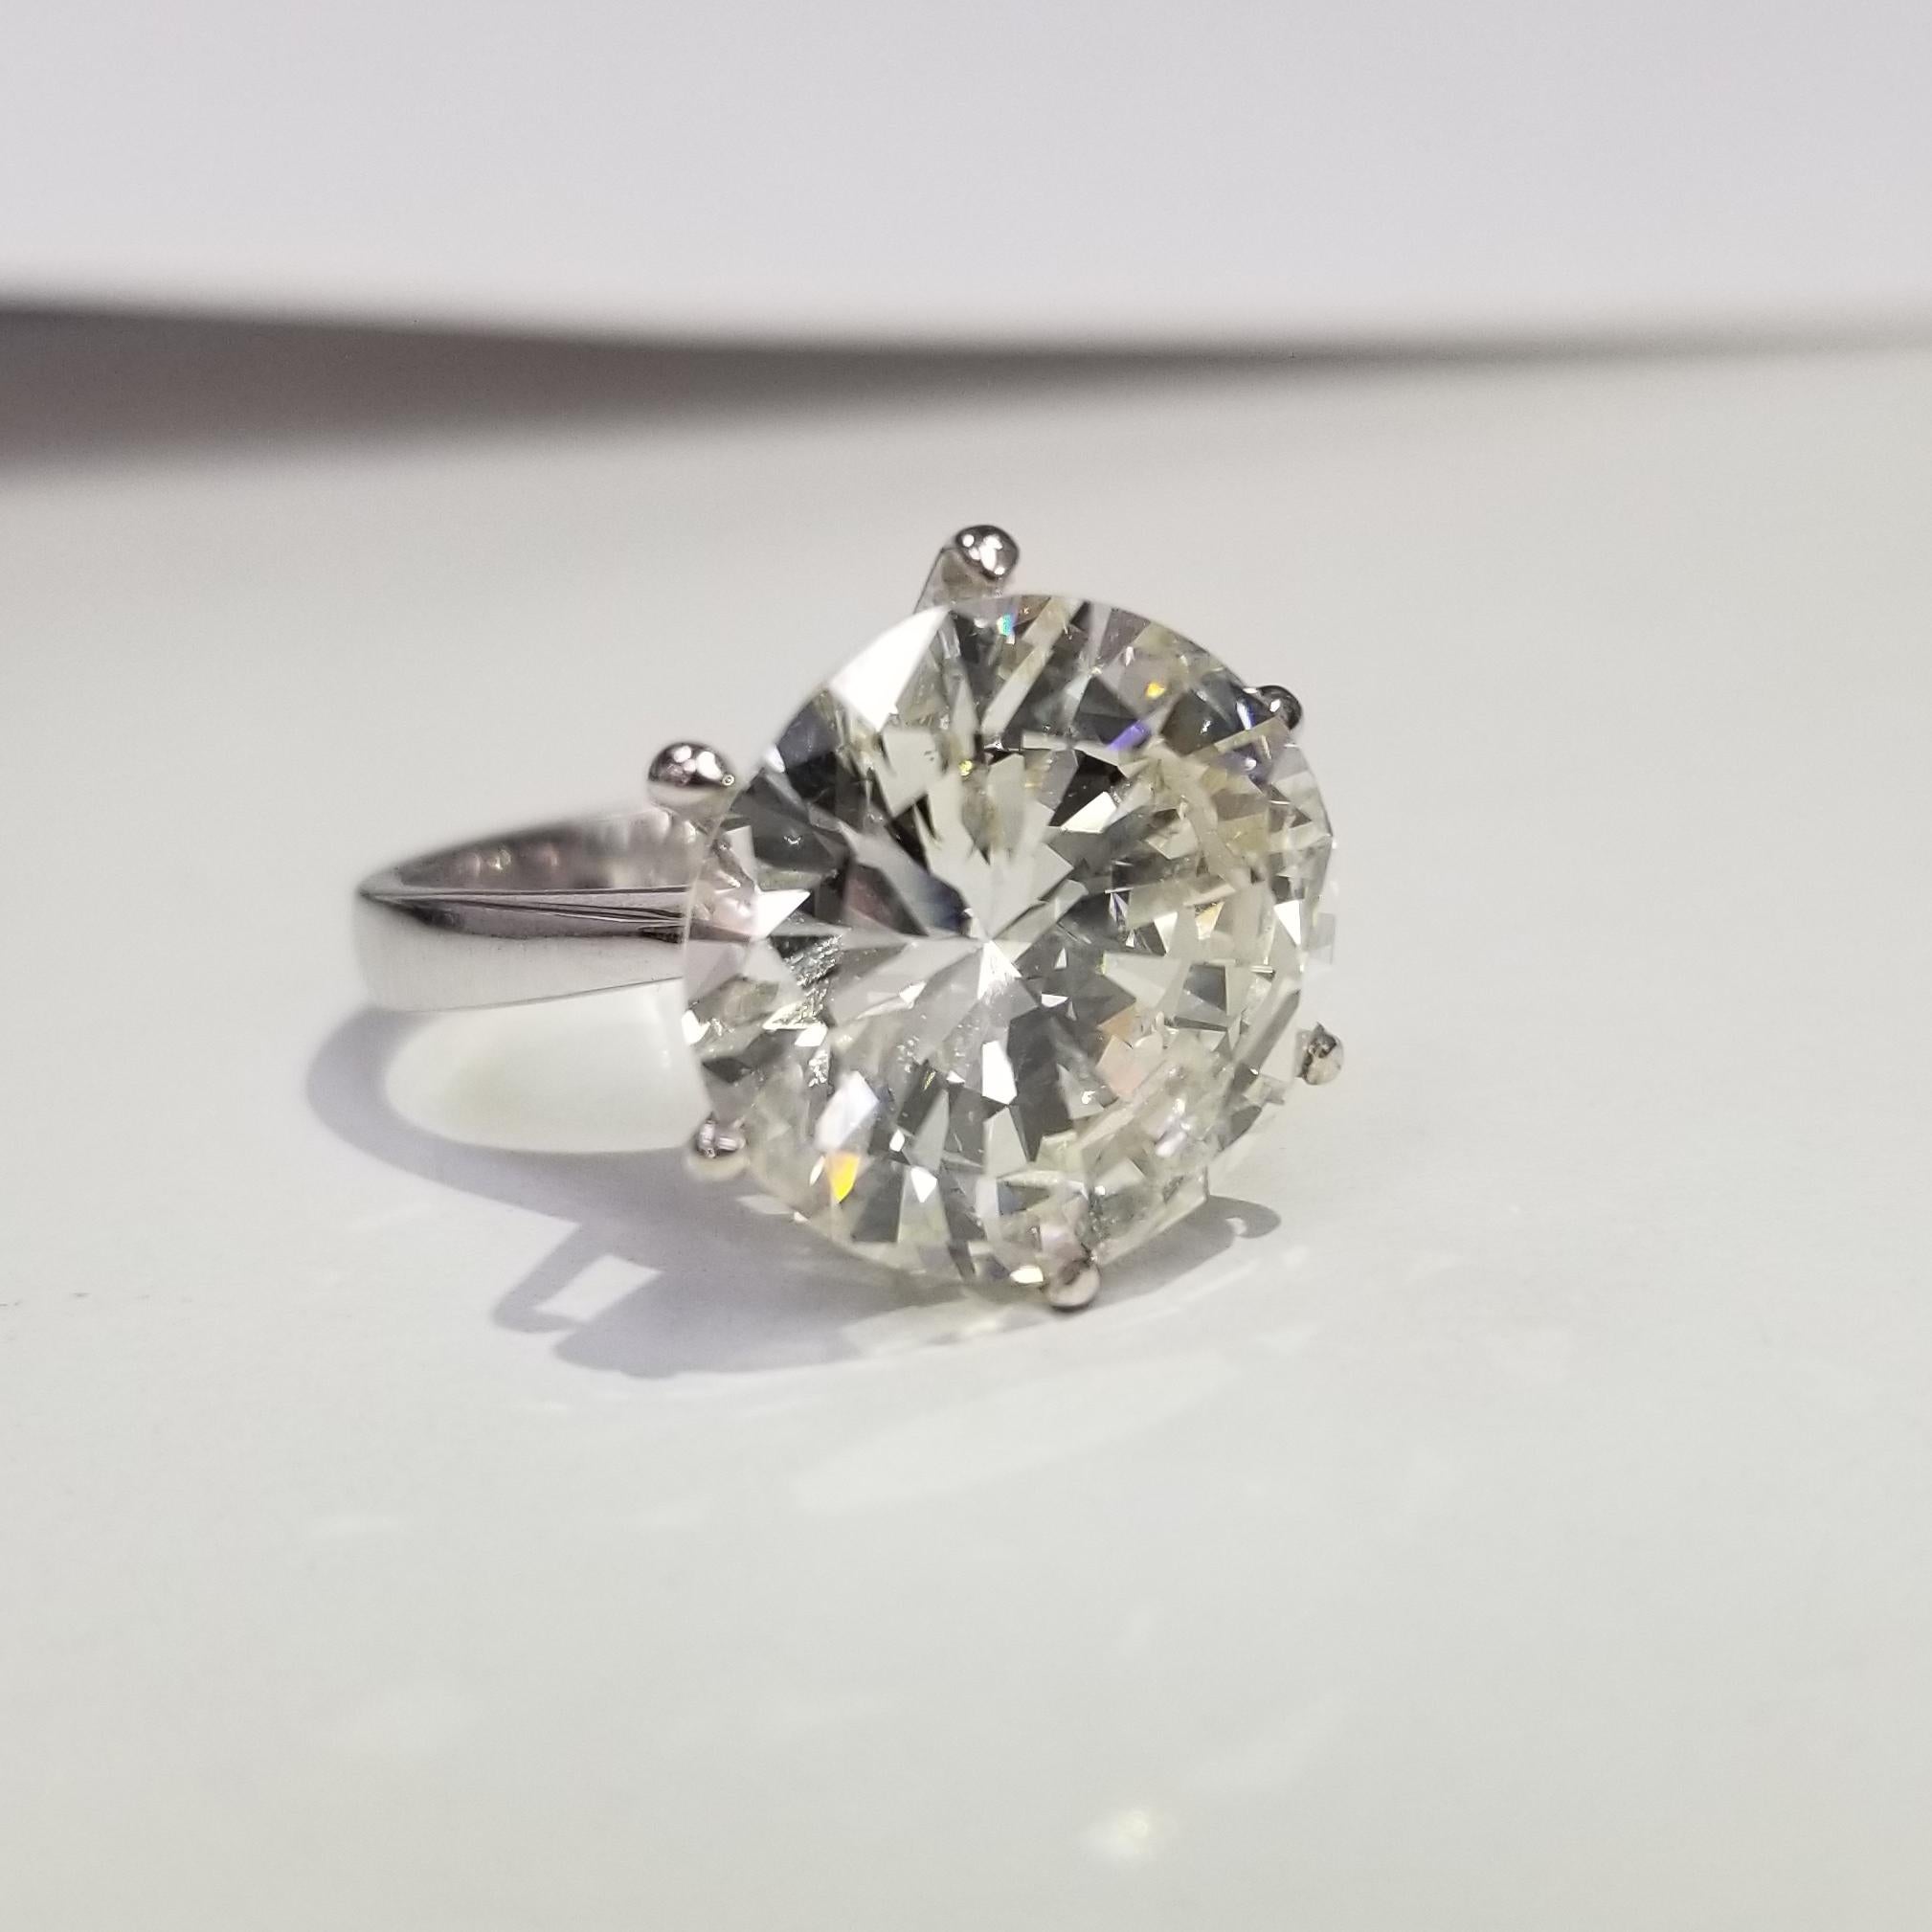 14k white gold diamond solitaire containing 1 brilliant cut diamond; color H, clarity SI2 and weight 10.64cts. (US 62926906D).